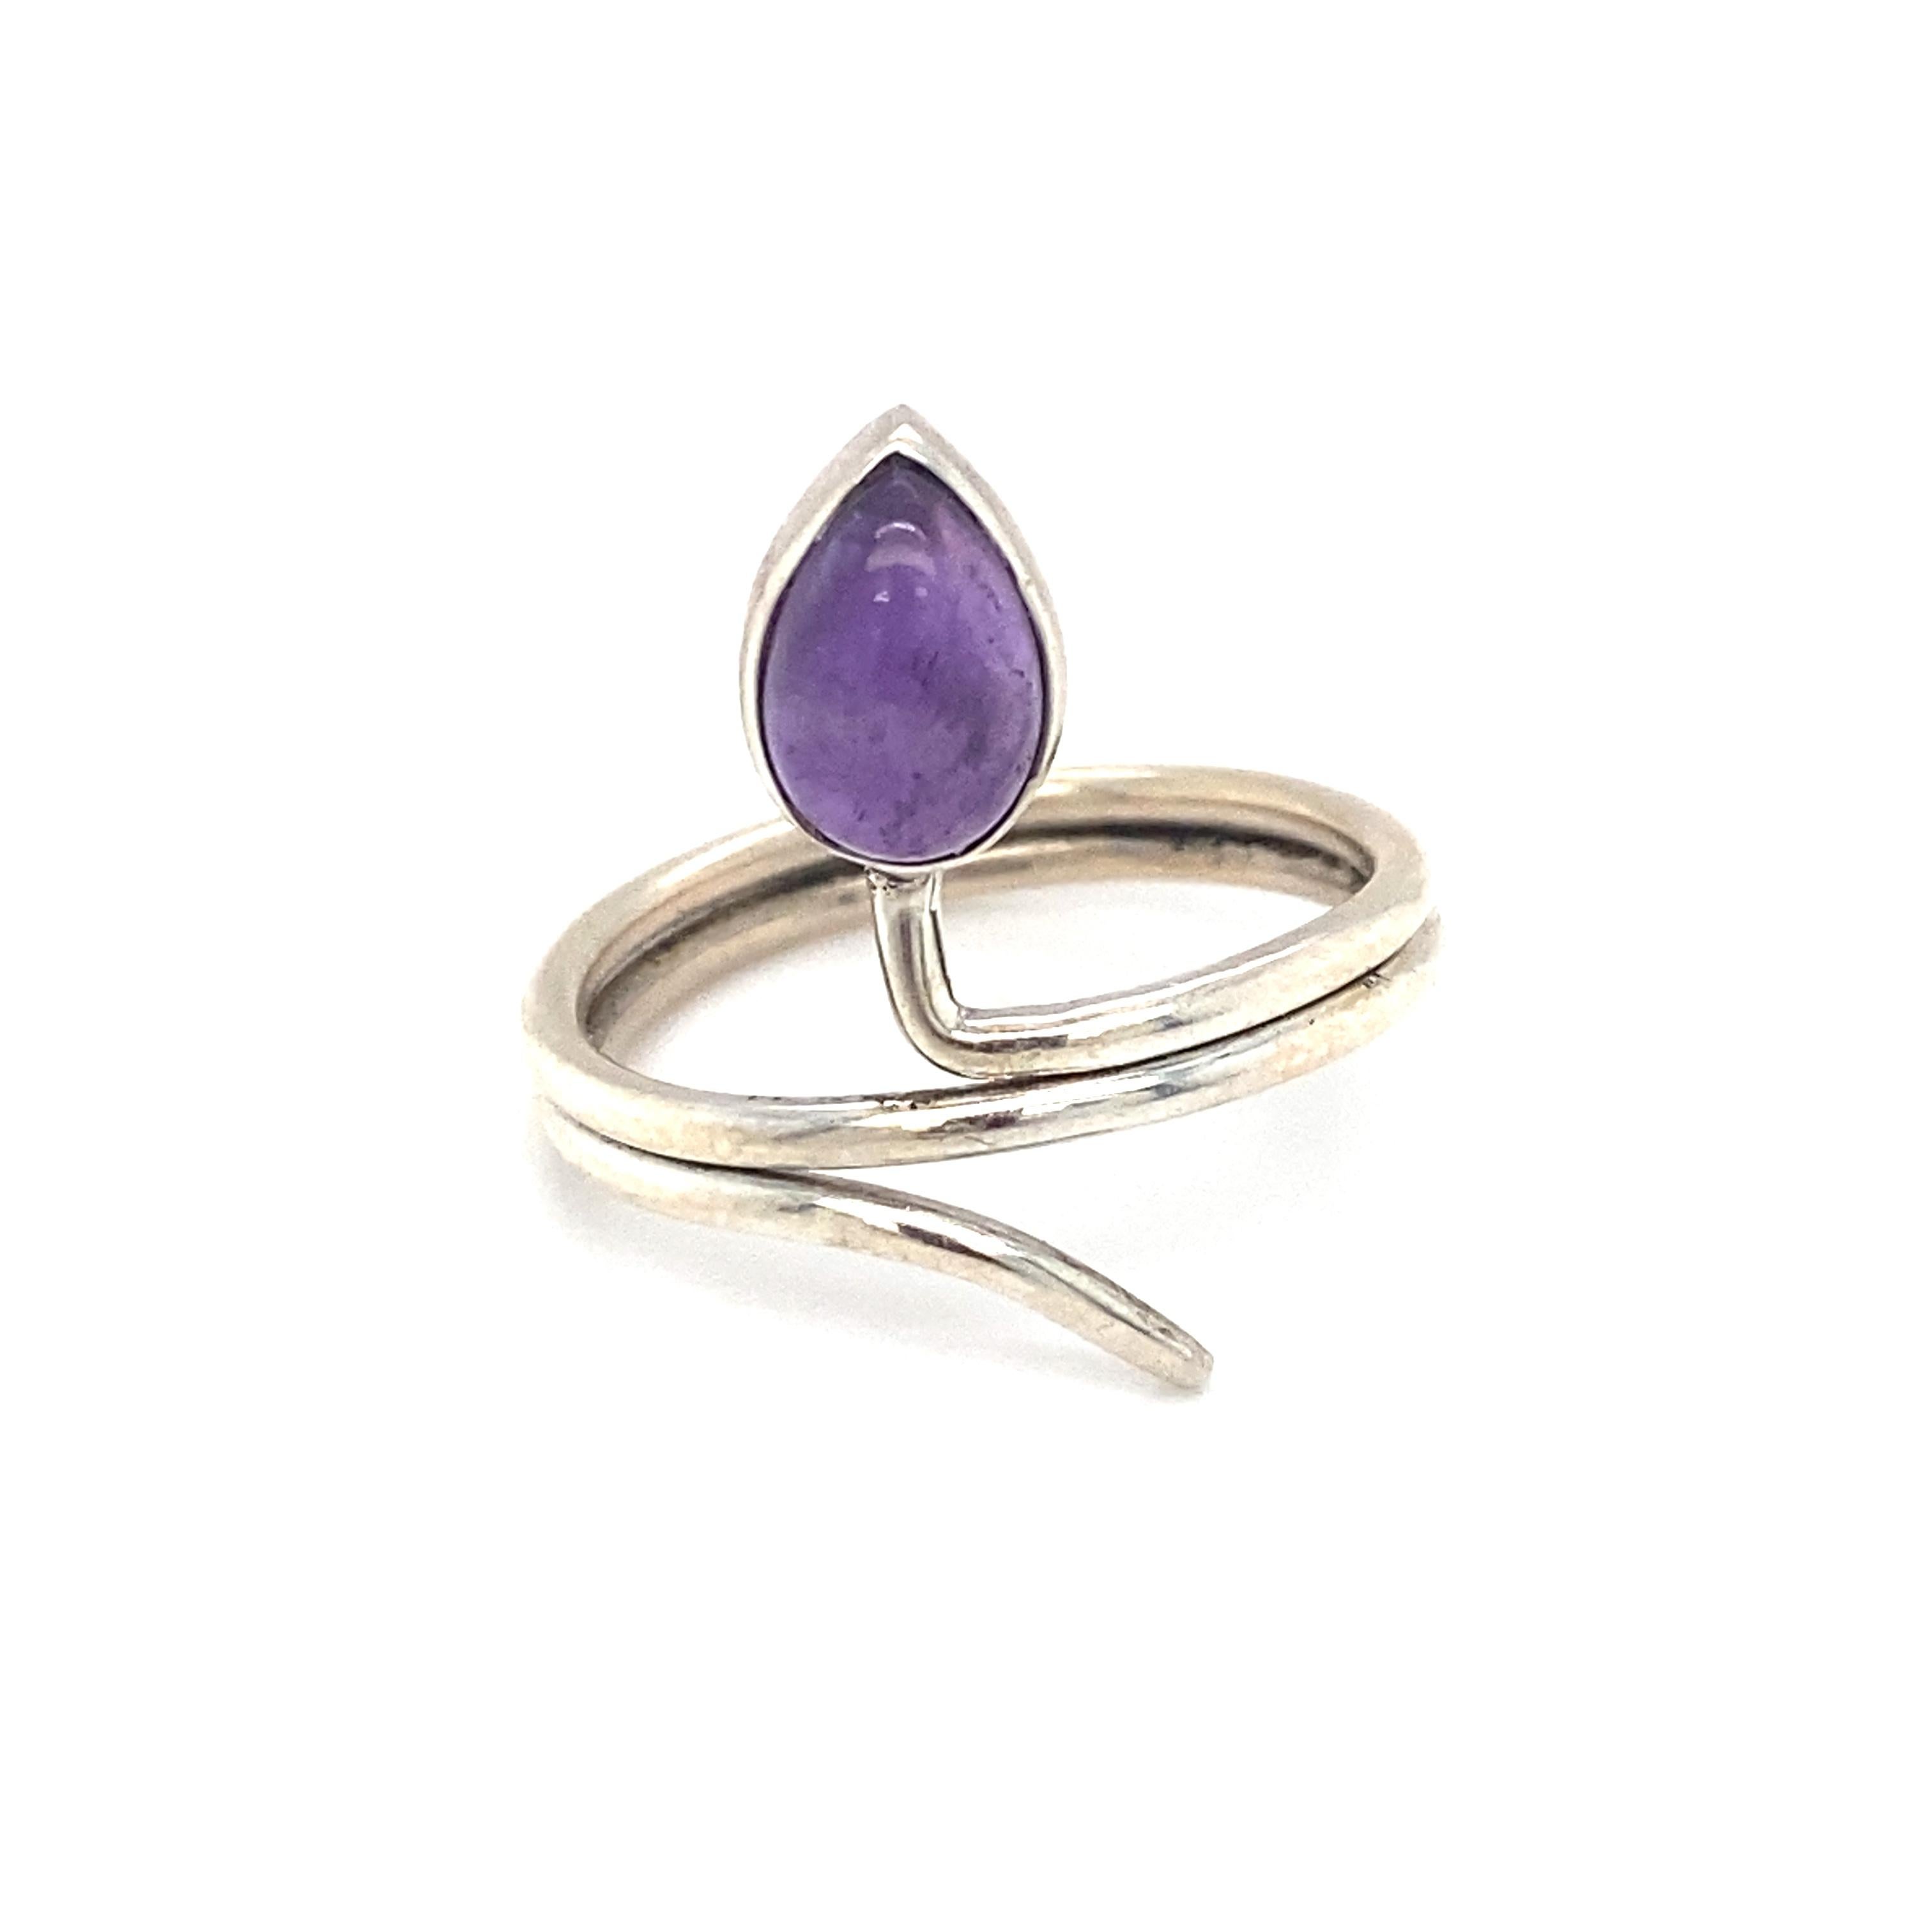 
Item Details: This slightly adjustable serpent ring has one pear cut cabochon amethyst stone.

Circa: 21st Century
Metal Type: Sterling Silver
Weight: 3.6g
Size: US 9.5, slightly adjustable
